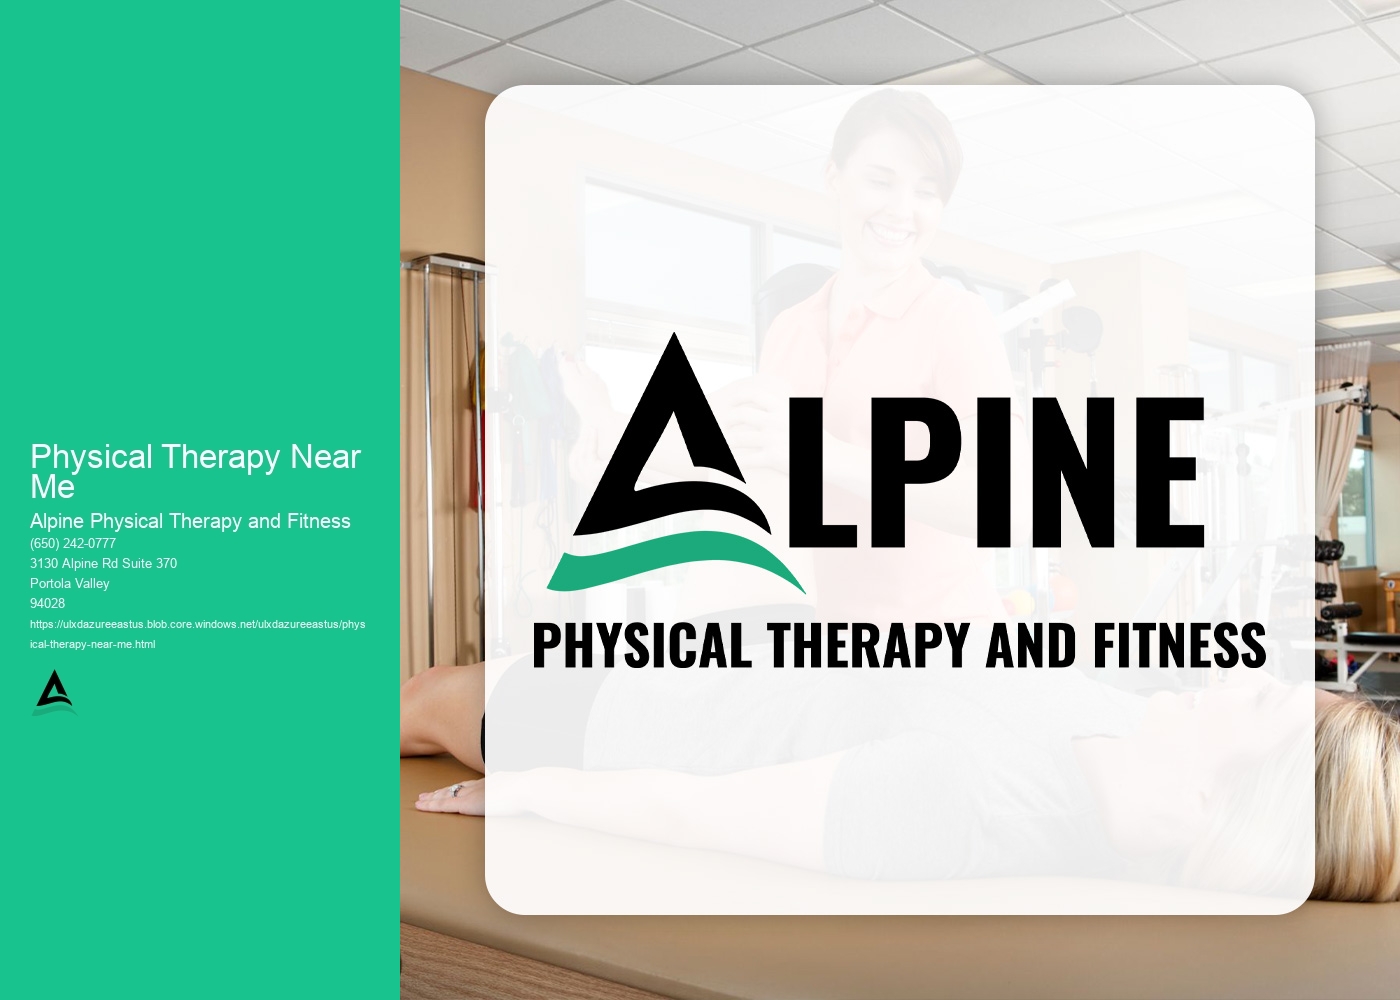 How does physical therapy address musculoskeletal issues such as back pain and joint stiffness?